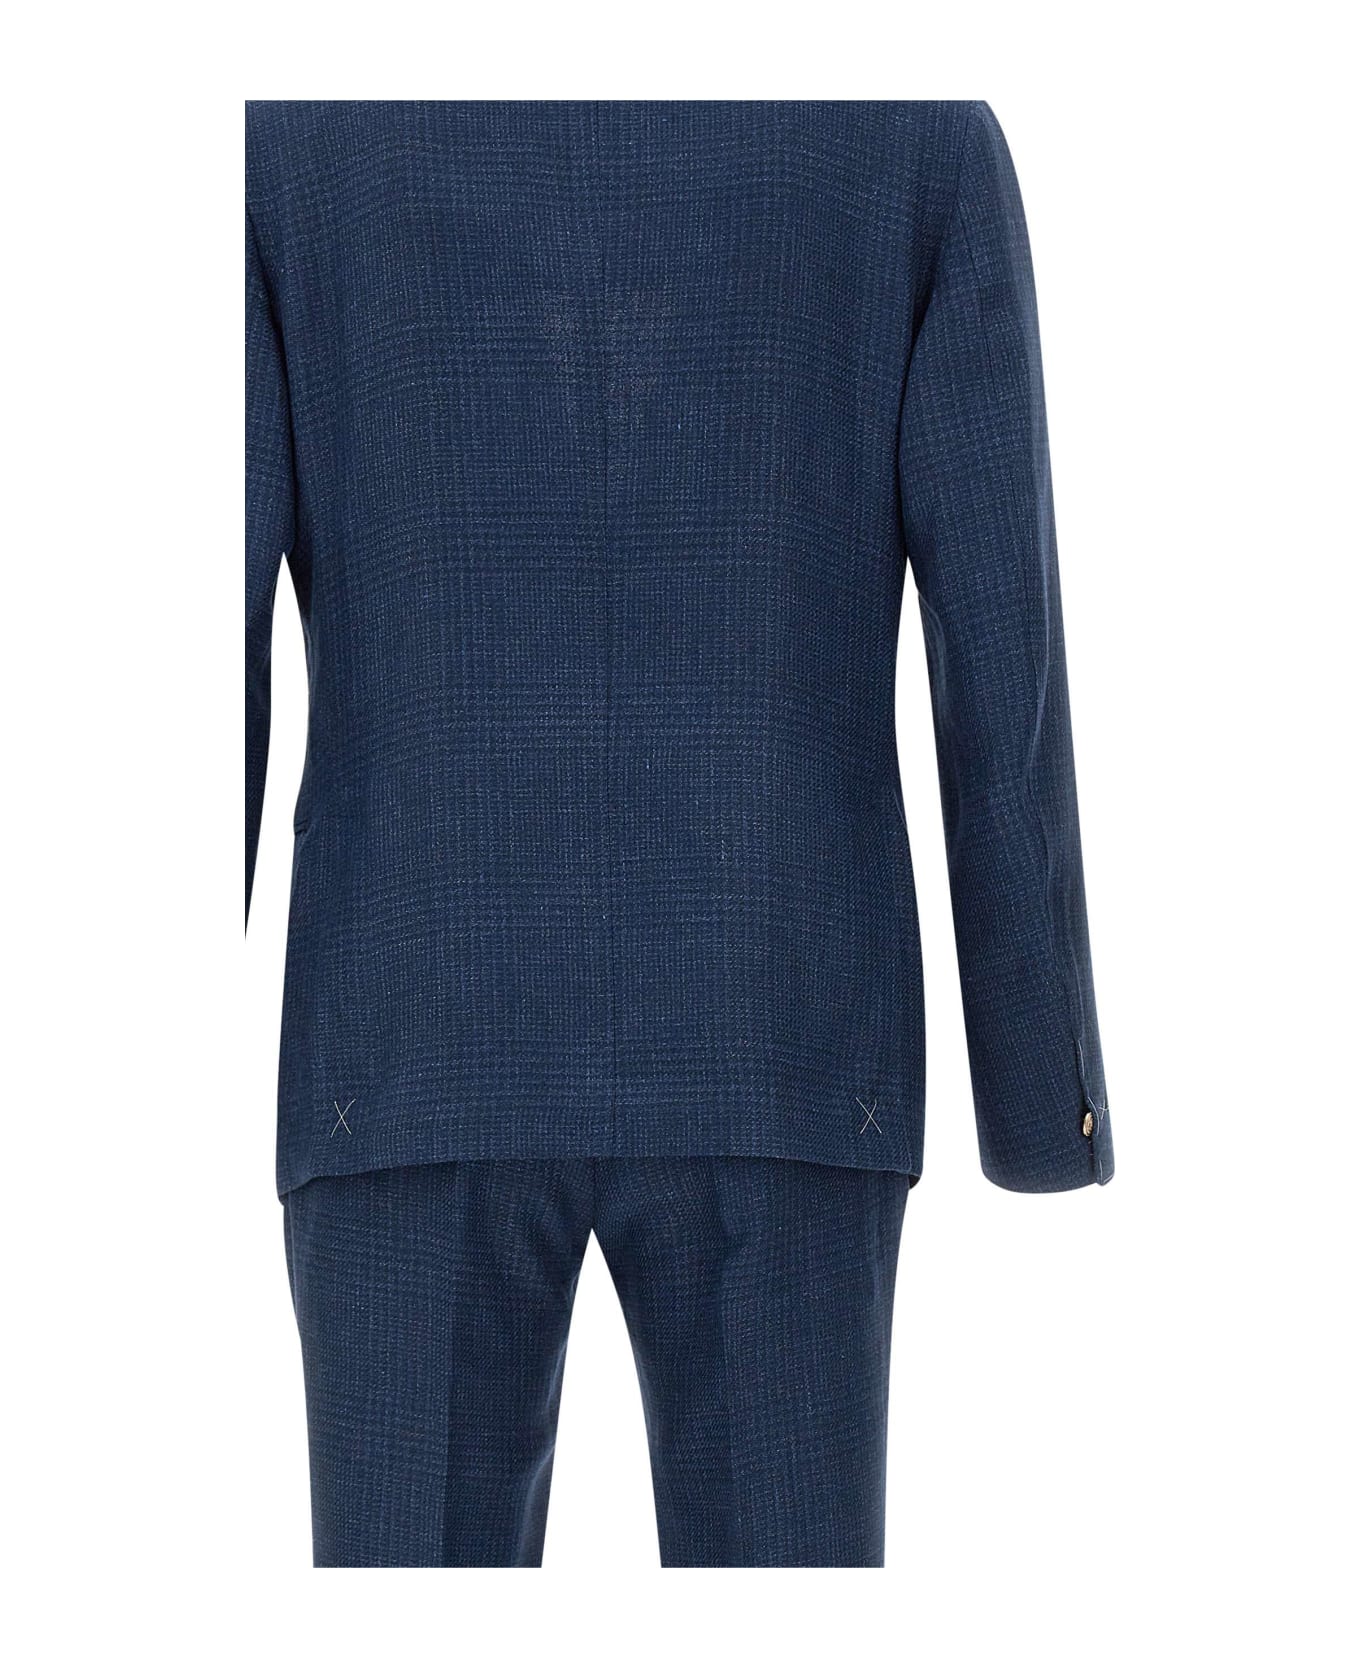 Eleventy Wool, Linen And Silk Suit Two-piece - BLUE